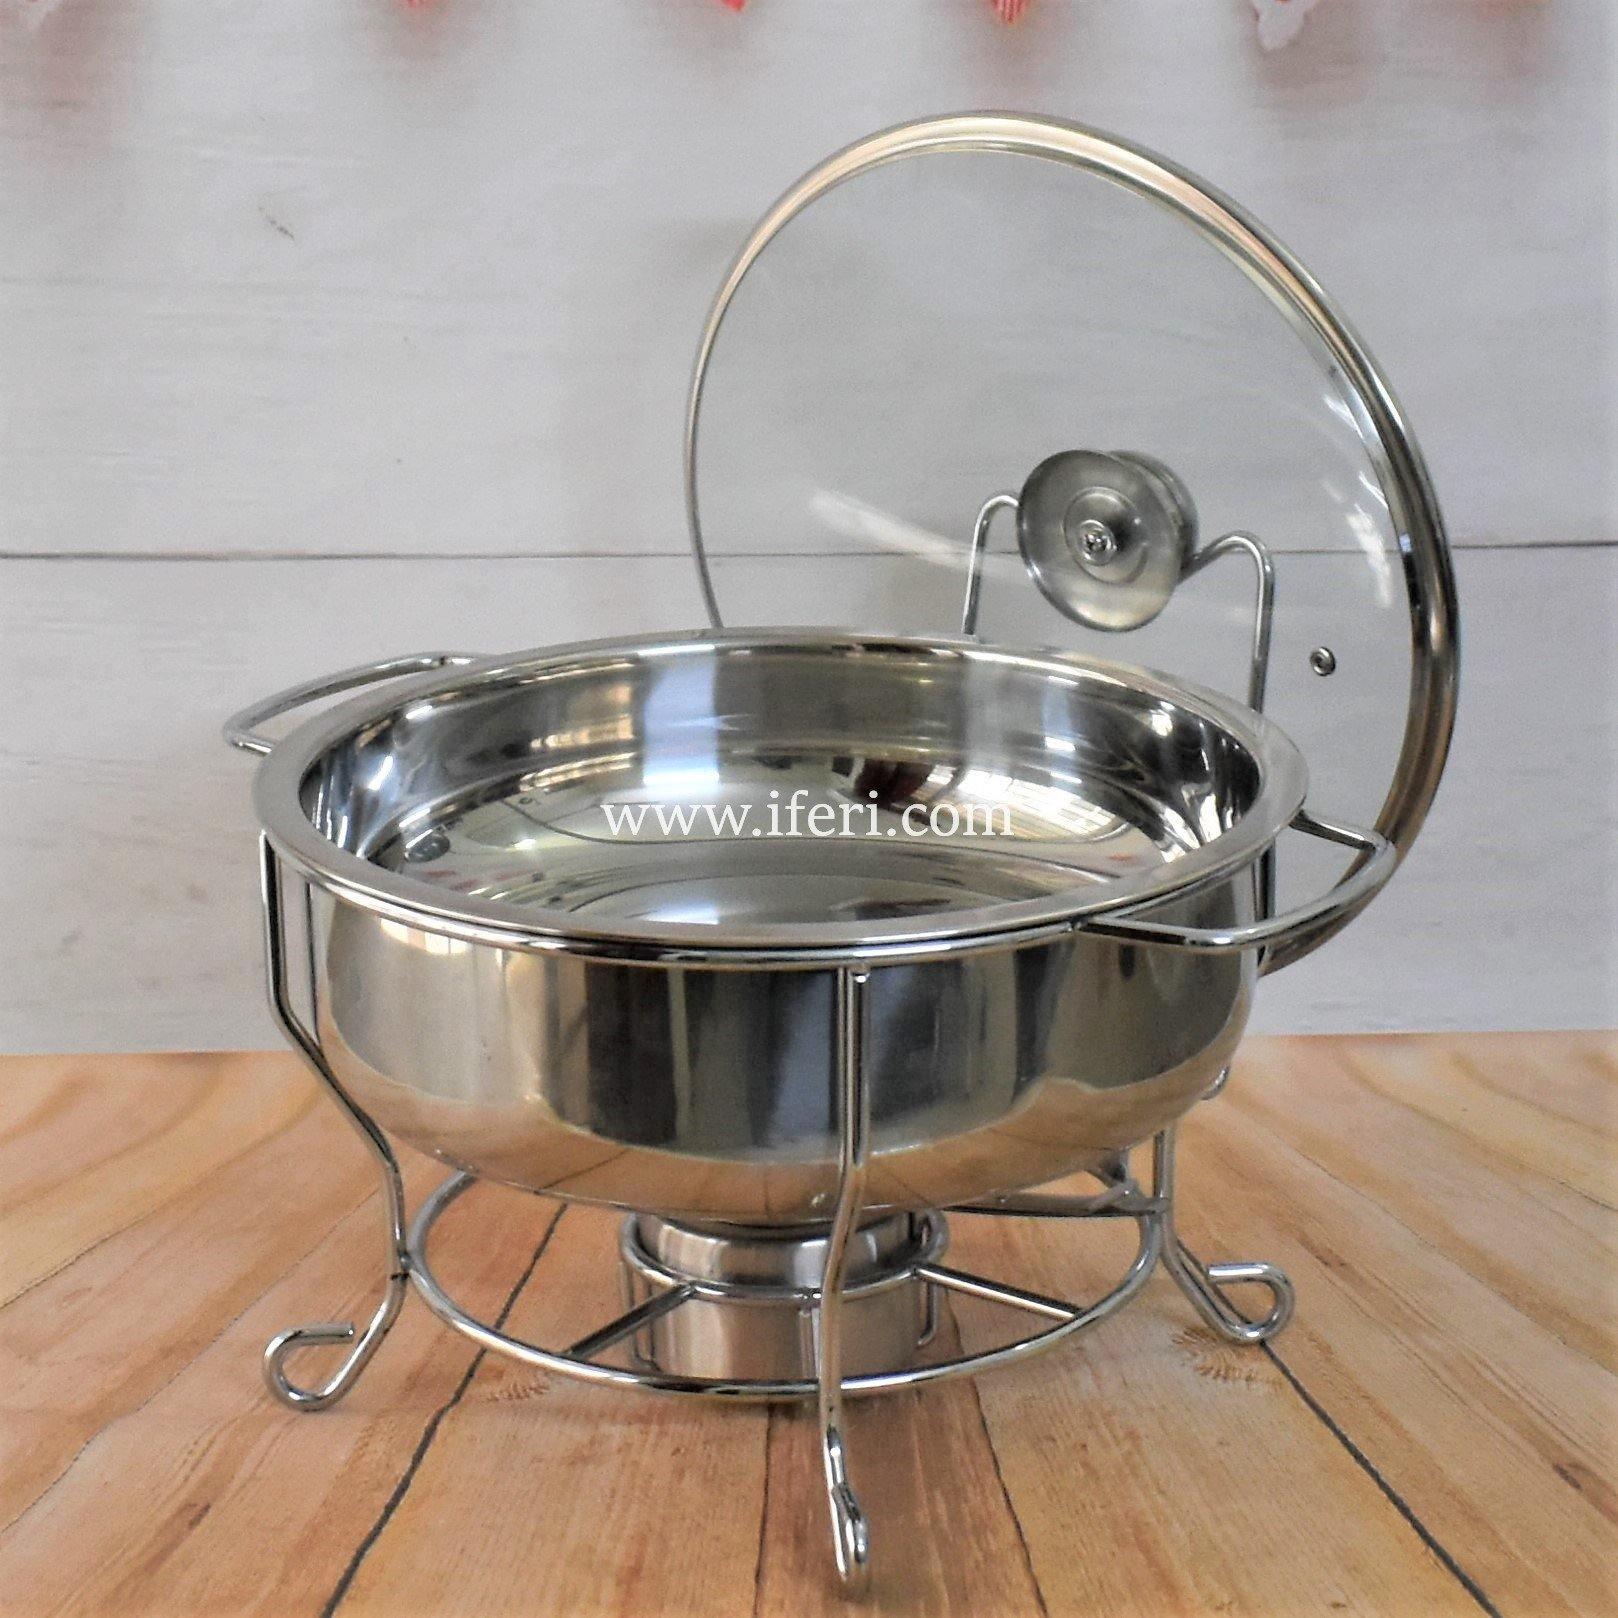 6 Liter Round Shape Buffet Chafing Dish with Glass Lid TB1032 Price in Bangladesh - iferi.com